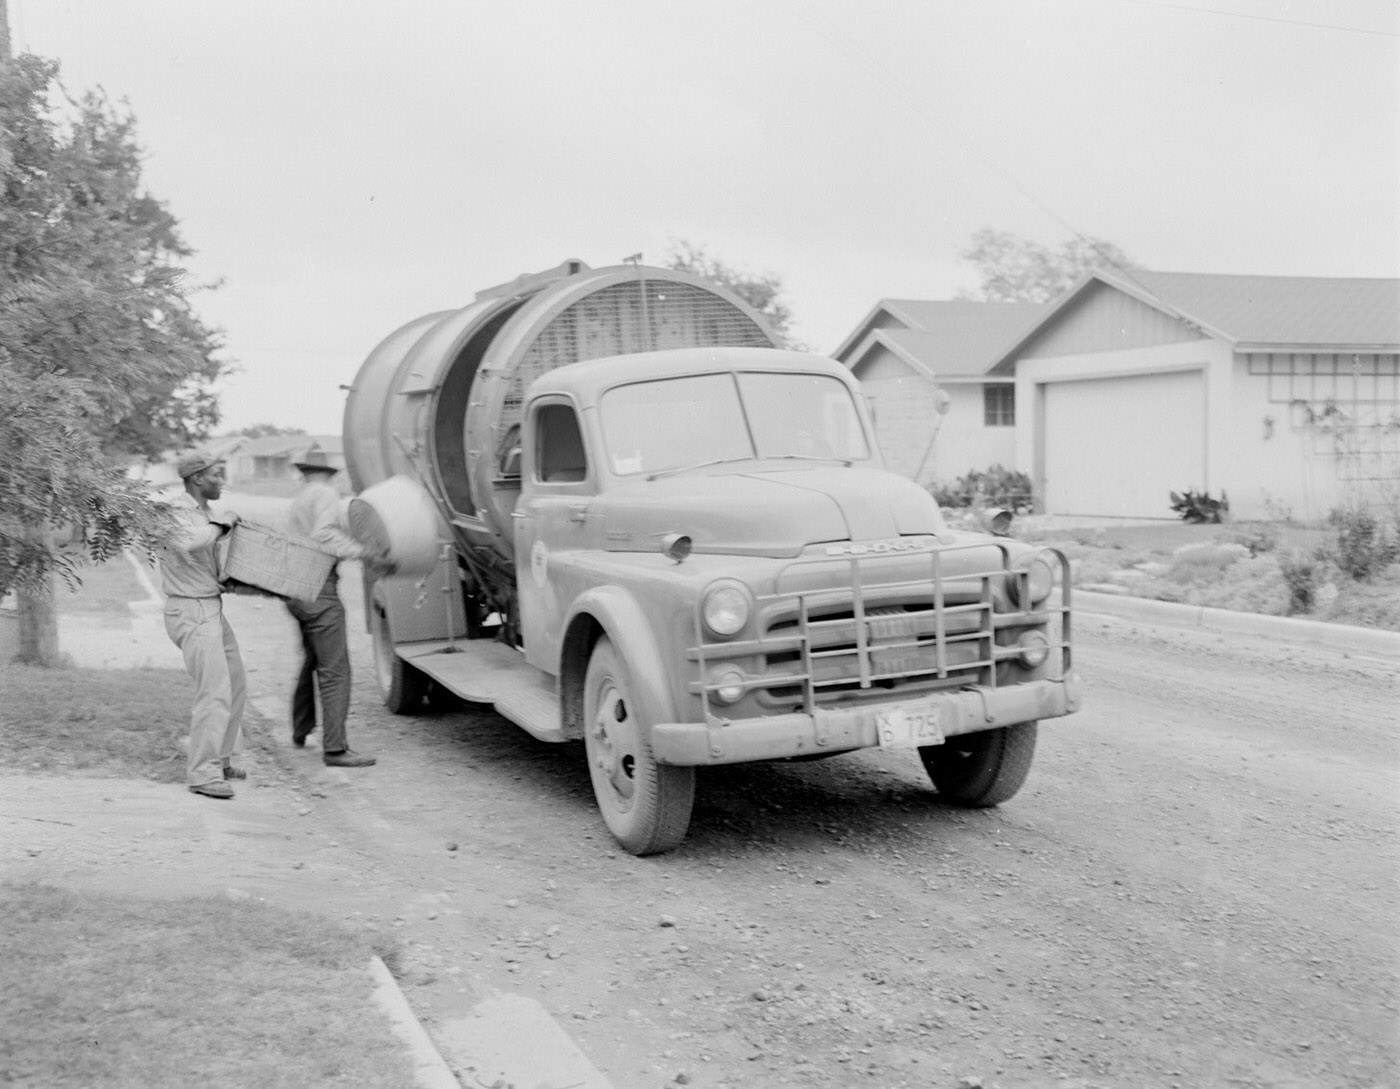 Sanitation Workers Emptying Containers into Truck, 1953.